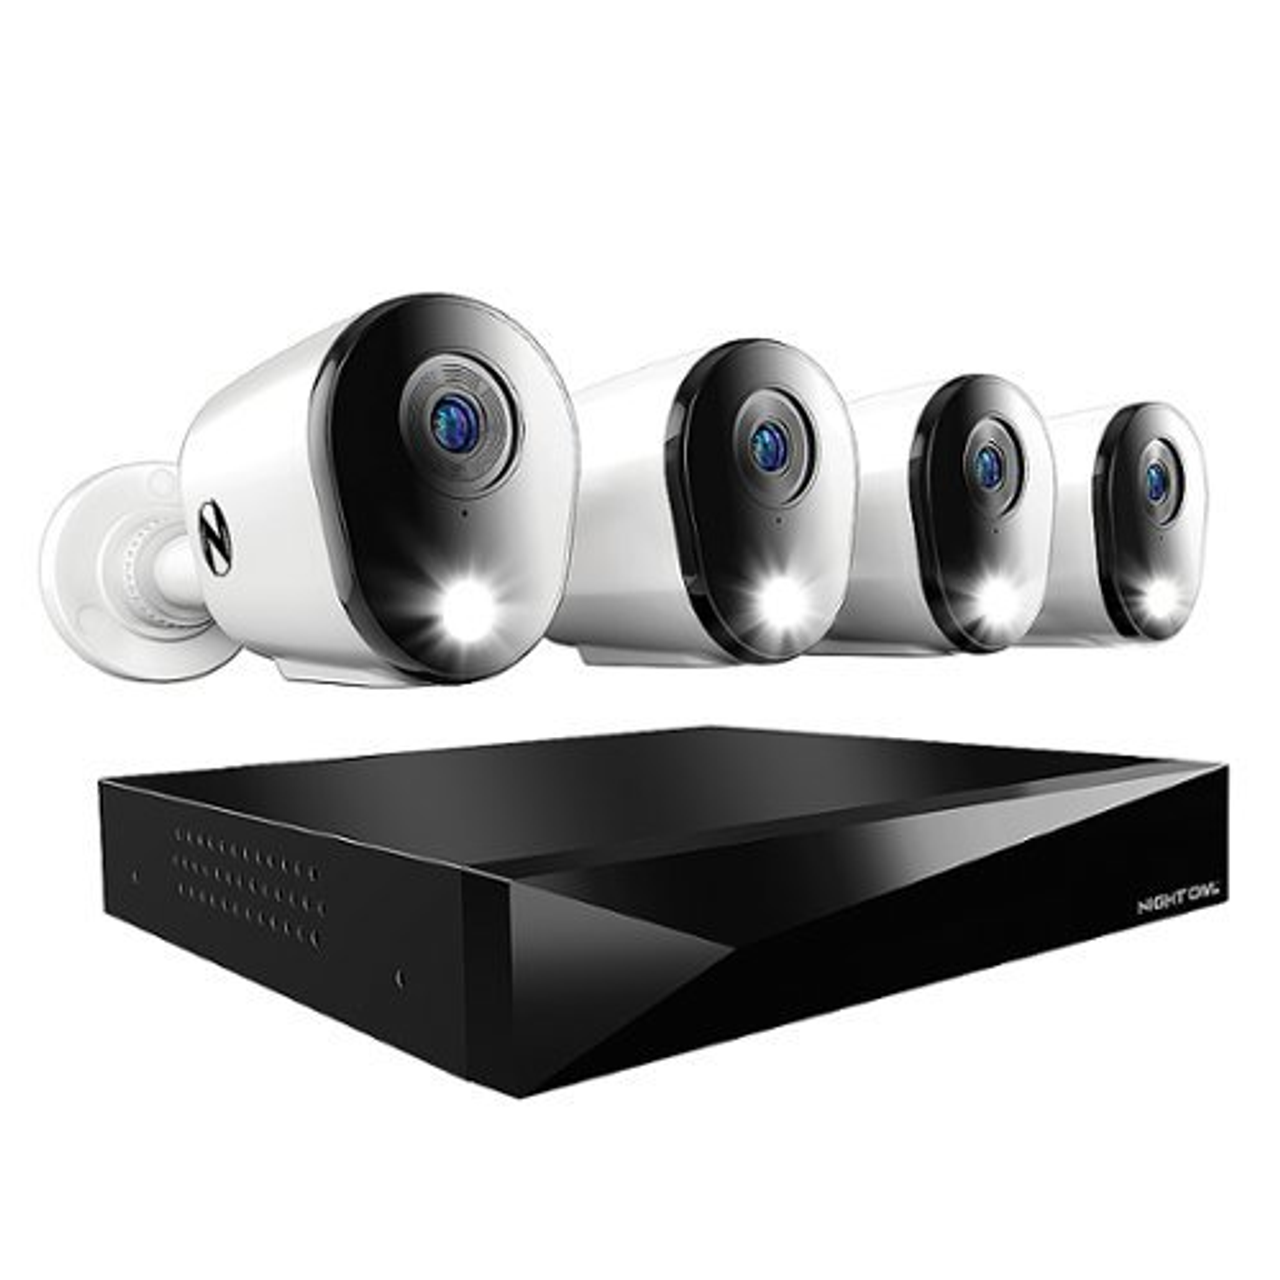 Night Owl - 2-Way Audio 12 Channel DVR Security System with 2TB Hard Drive and 4 Wired 2K Deterrence Cameras - White